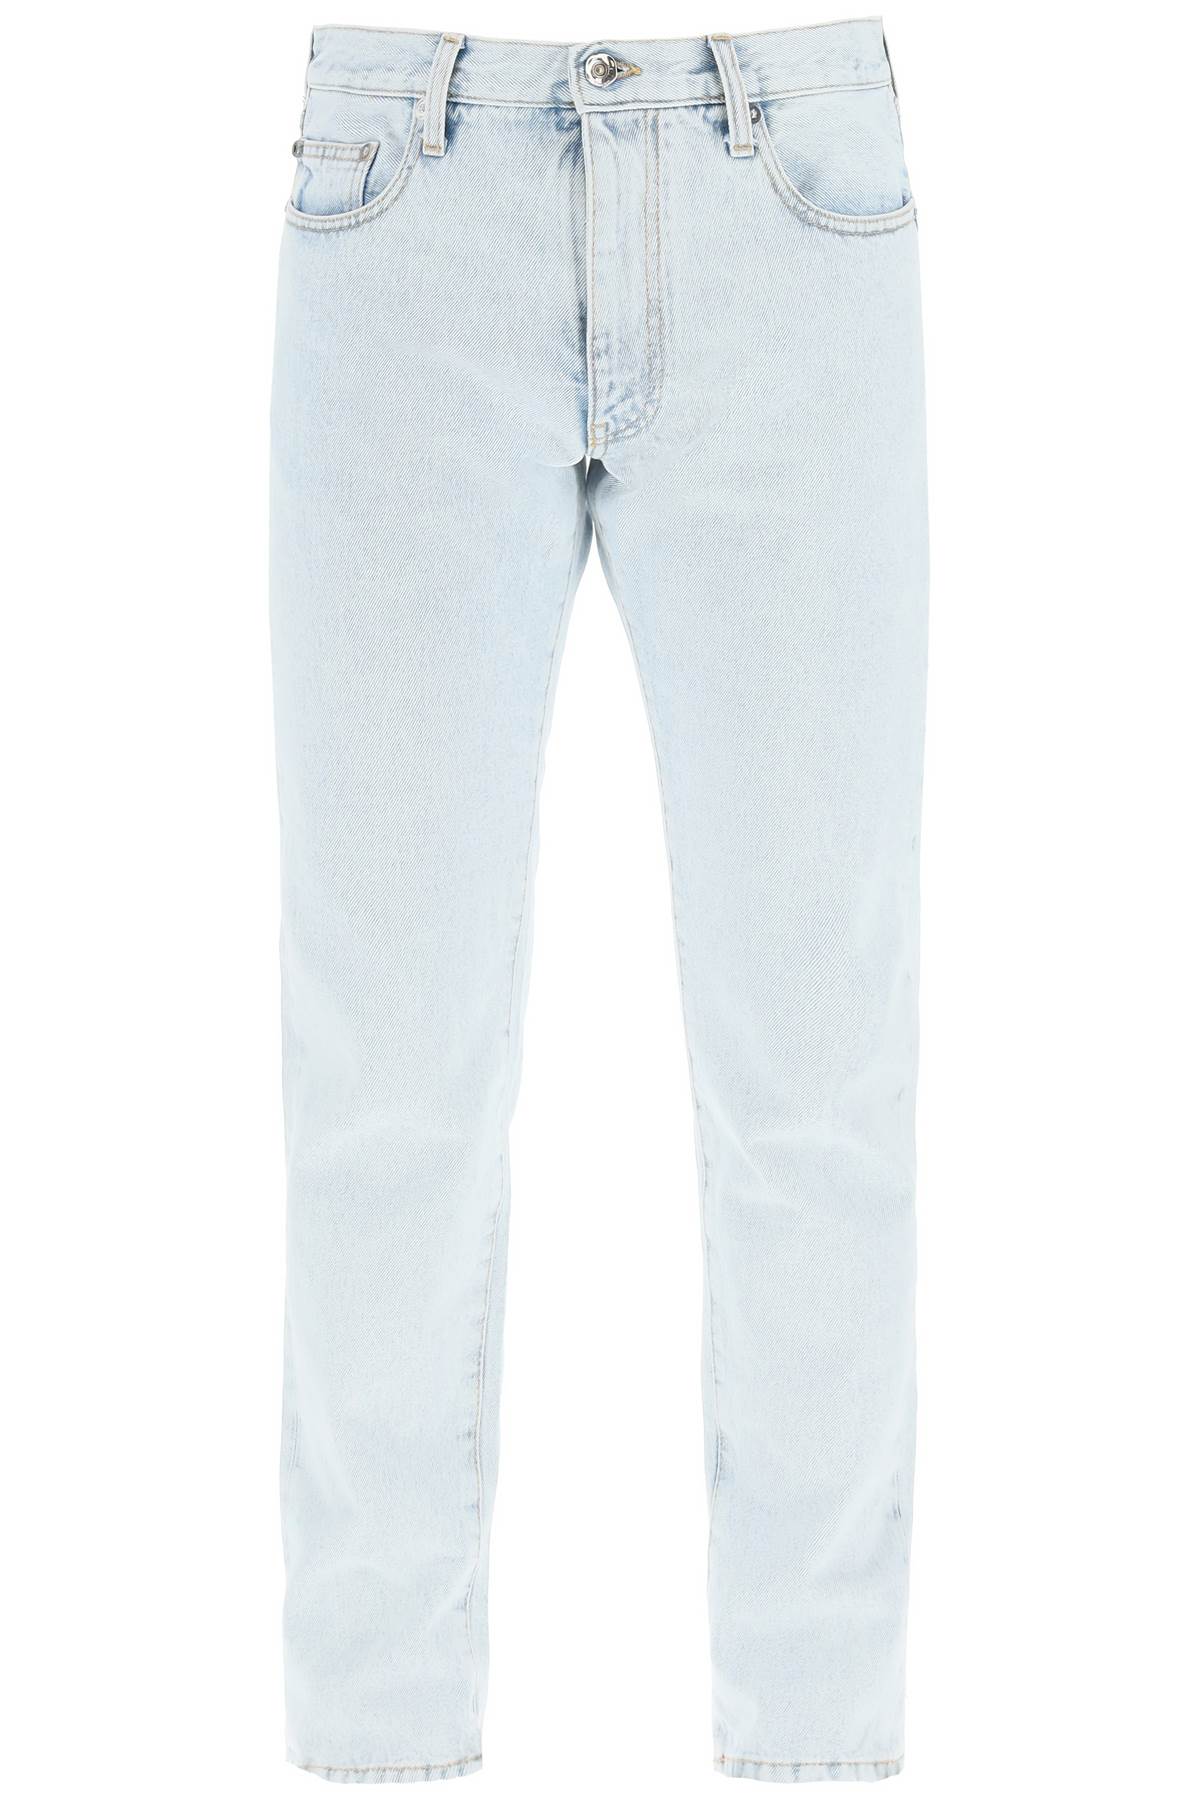 Off-White Slim Jeans With Diag Print